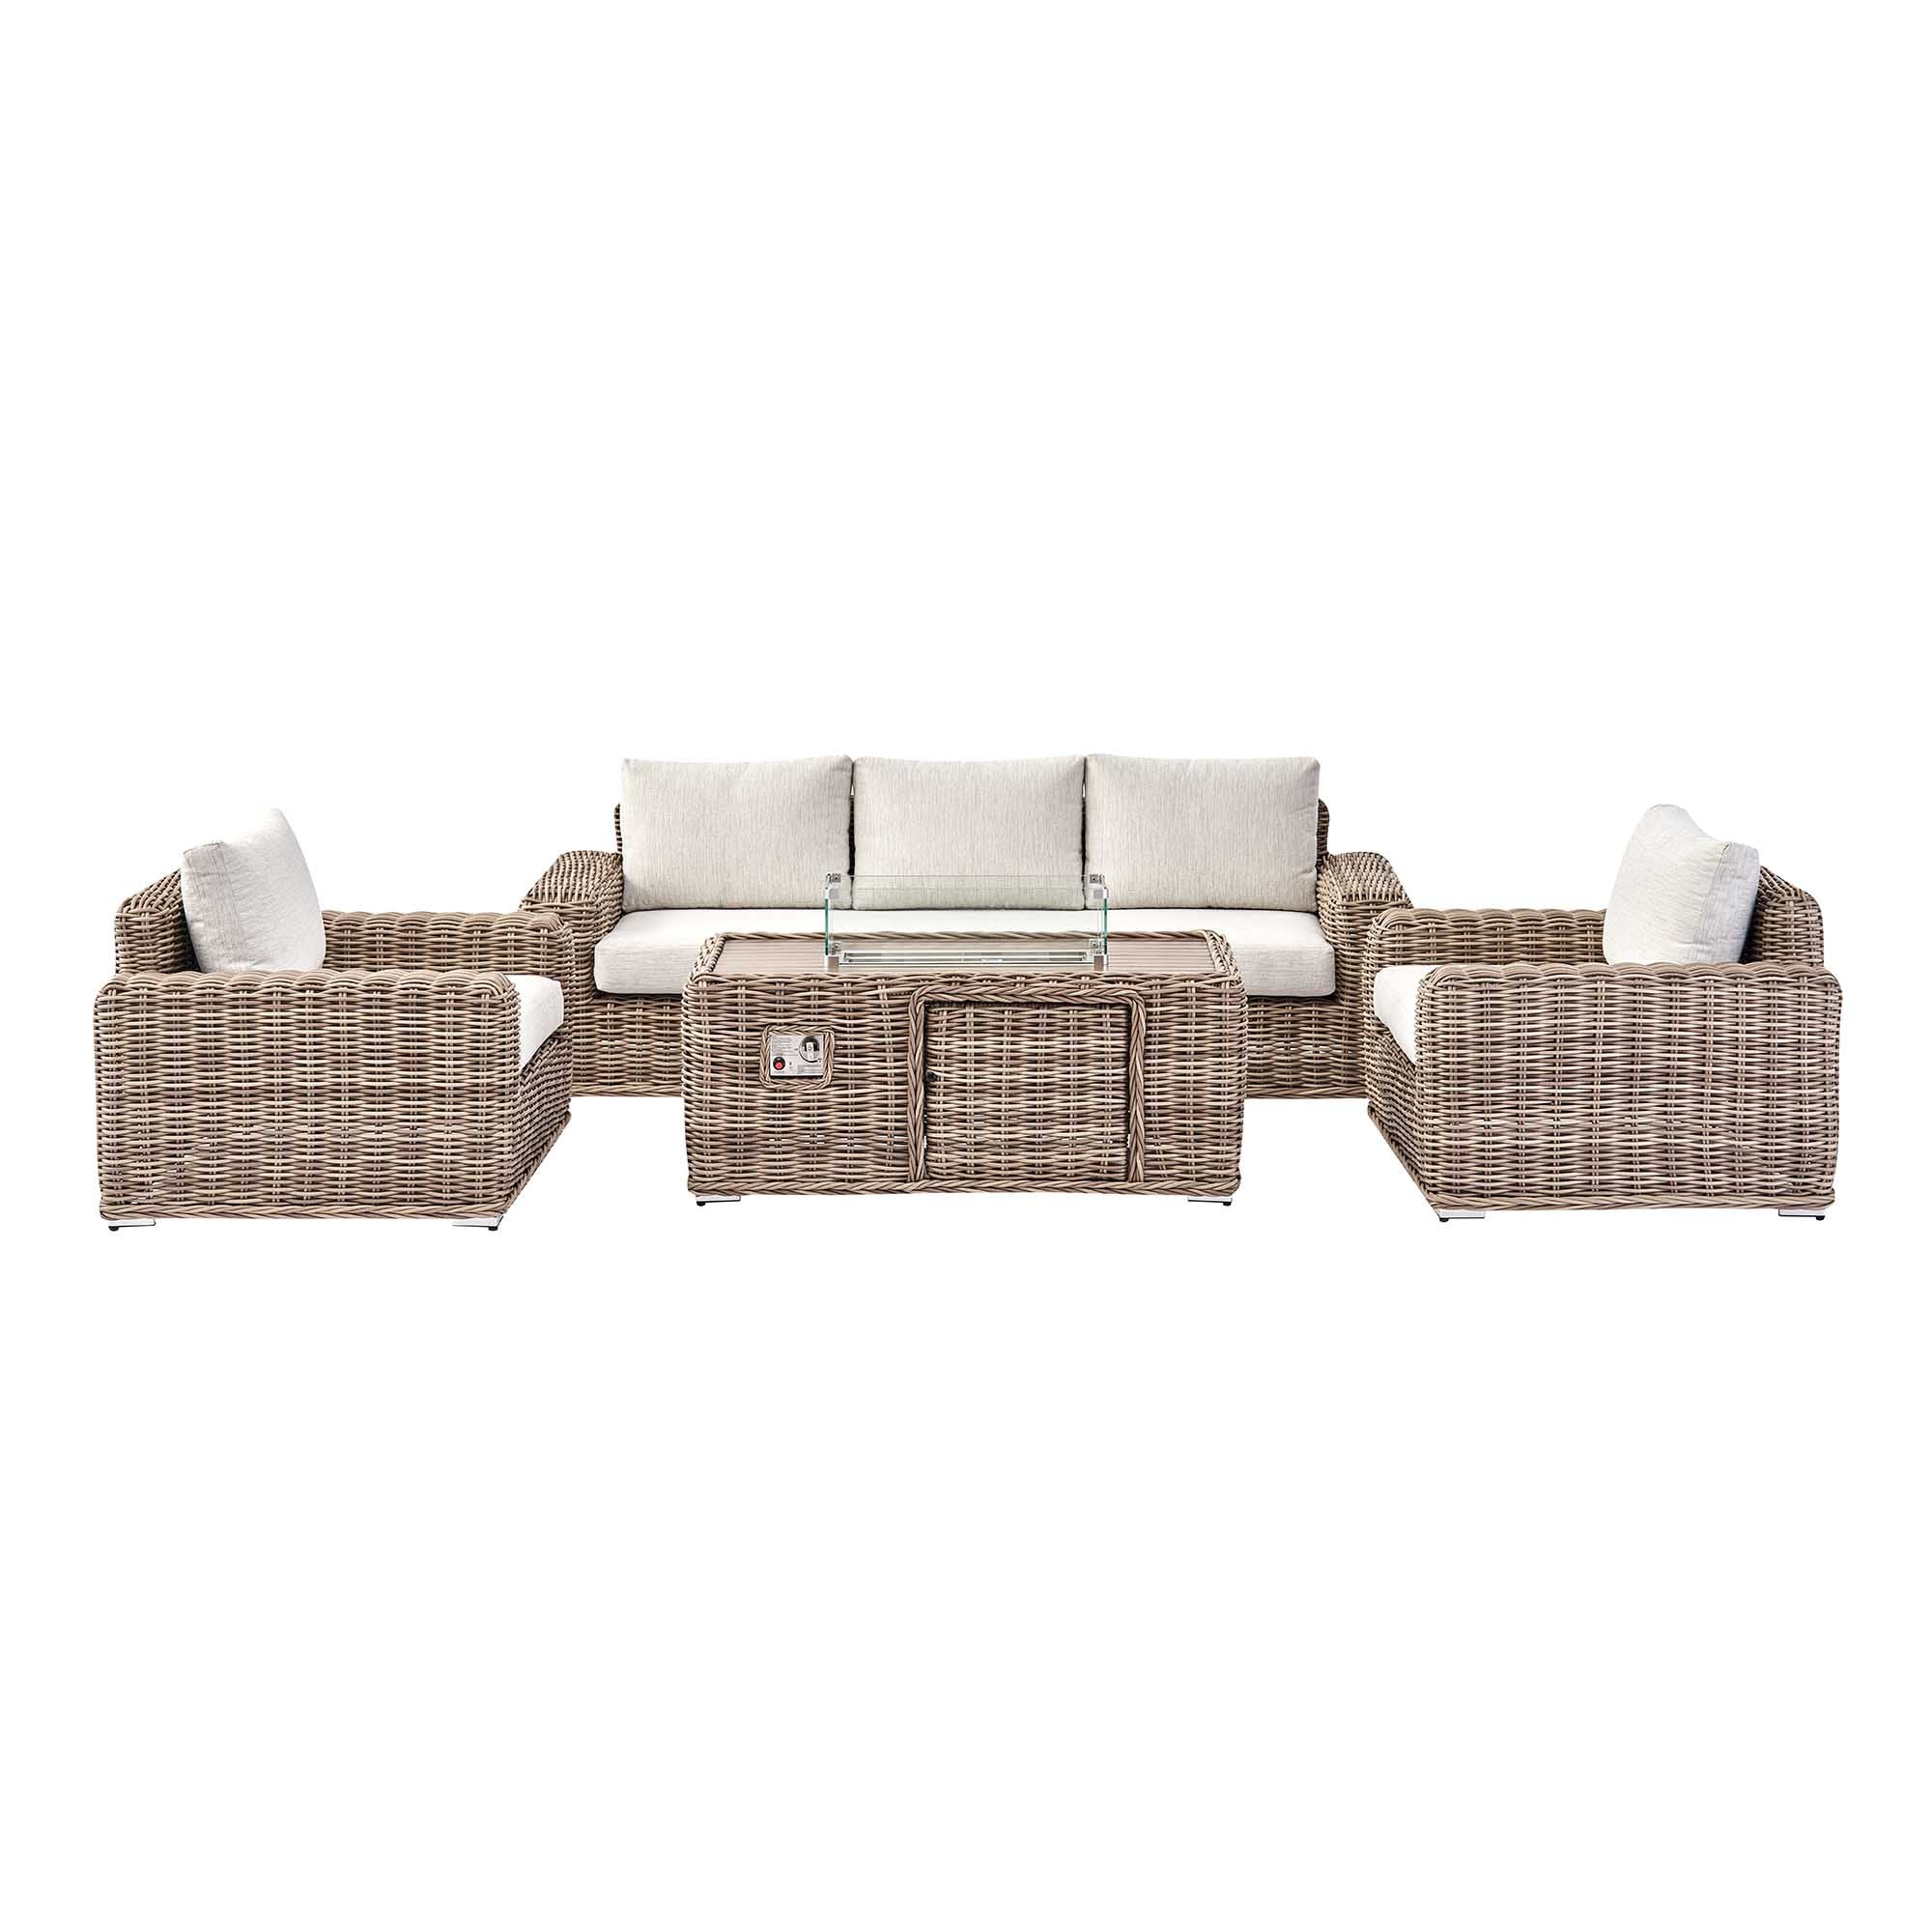 Bellagio Round Wicker Sofa Set with Firepit Coffee Table, Natural